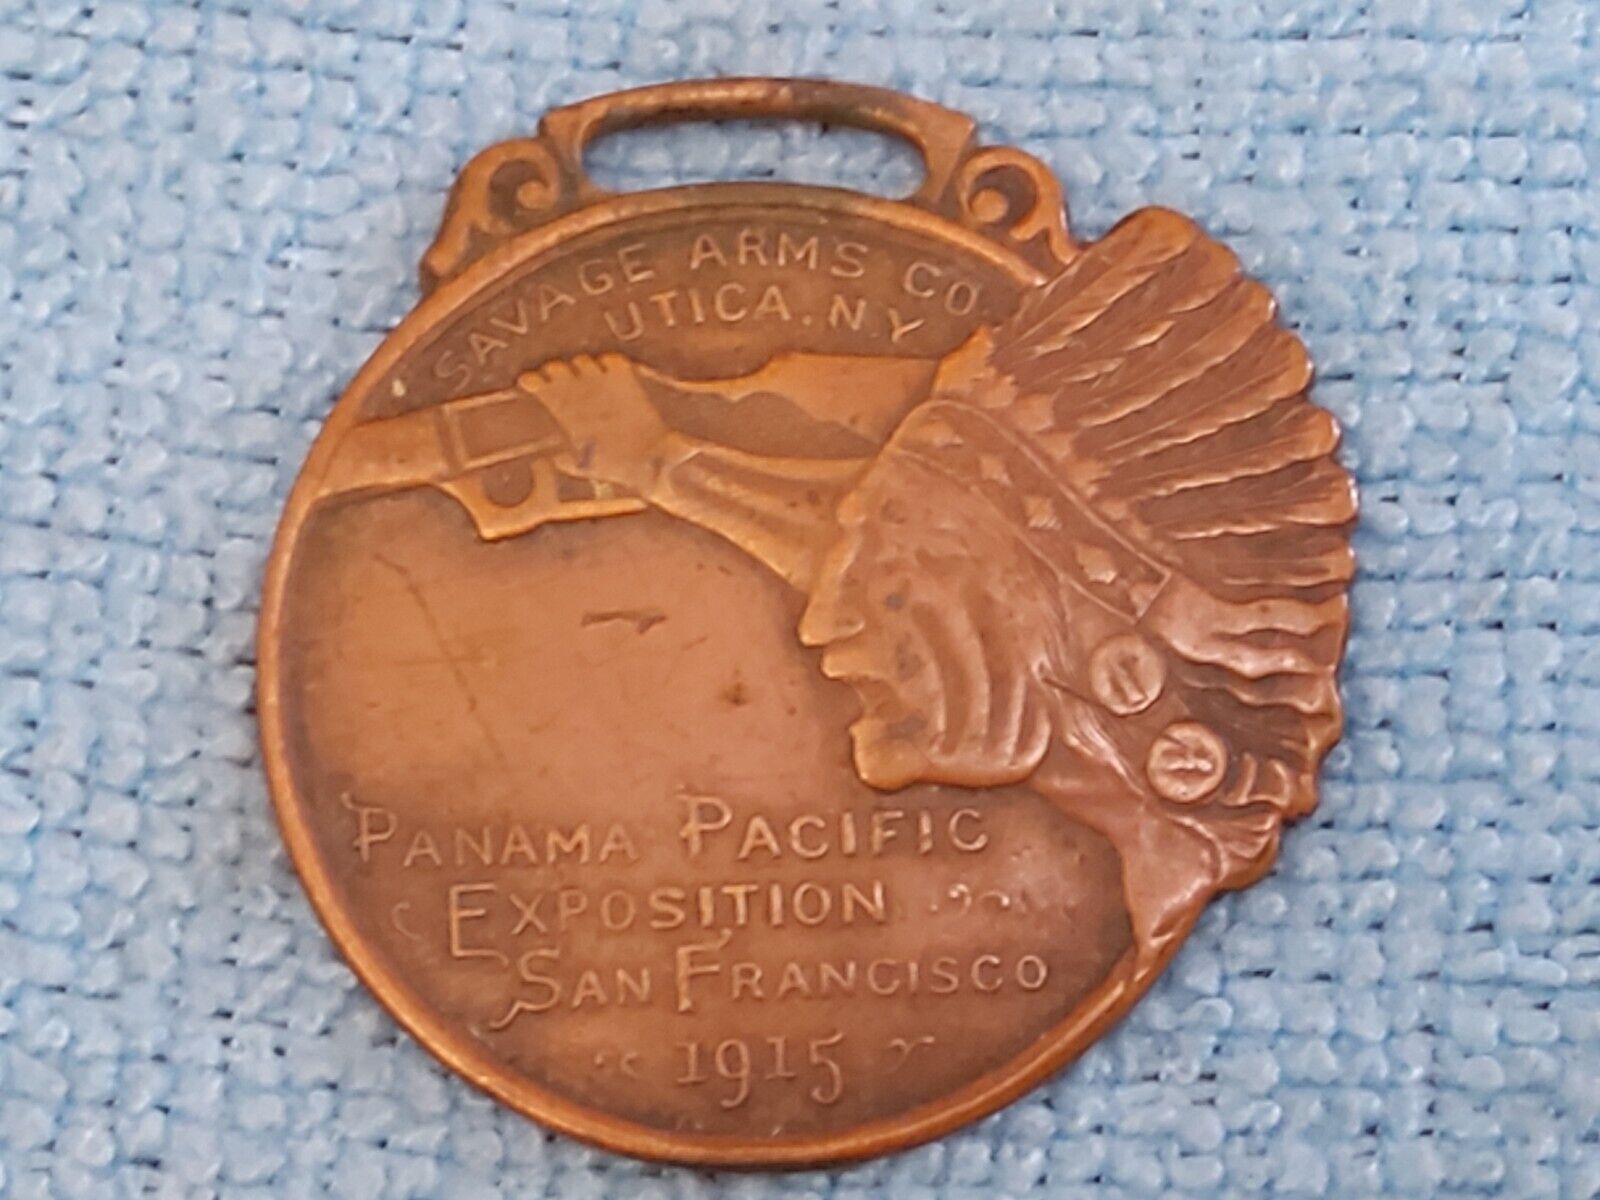 1915 SAVAGE ARMS CO. UTICA WATCH FOB PANAMA PACIFIC EXPOSITION PPIE